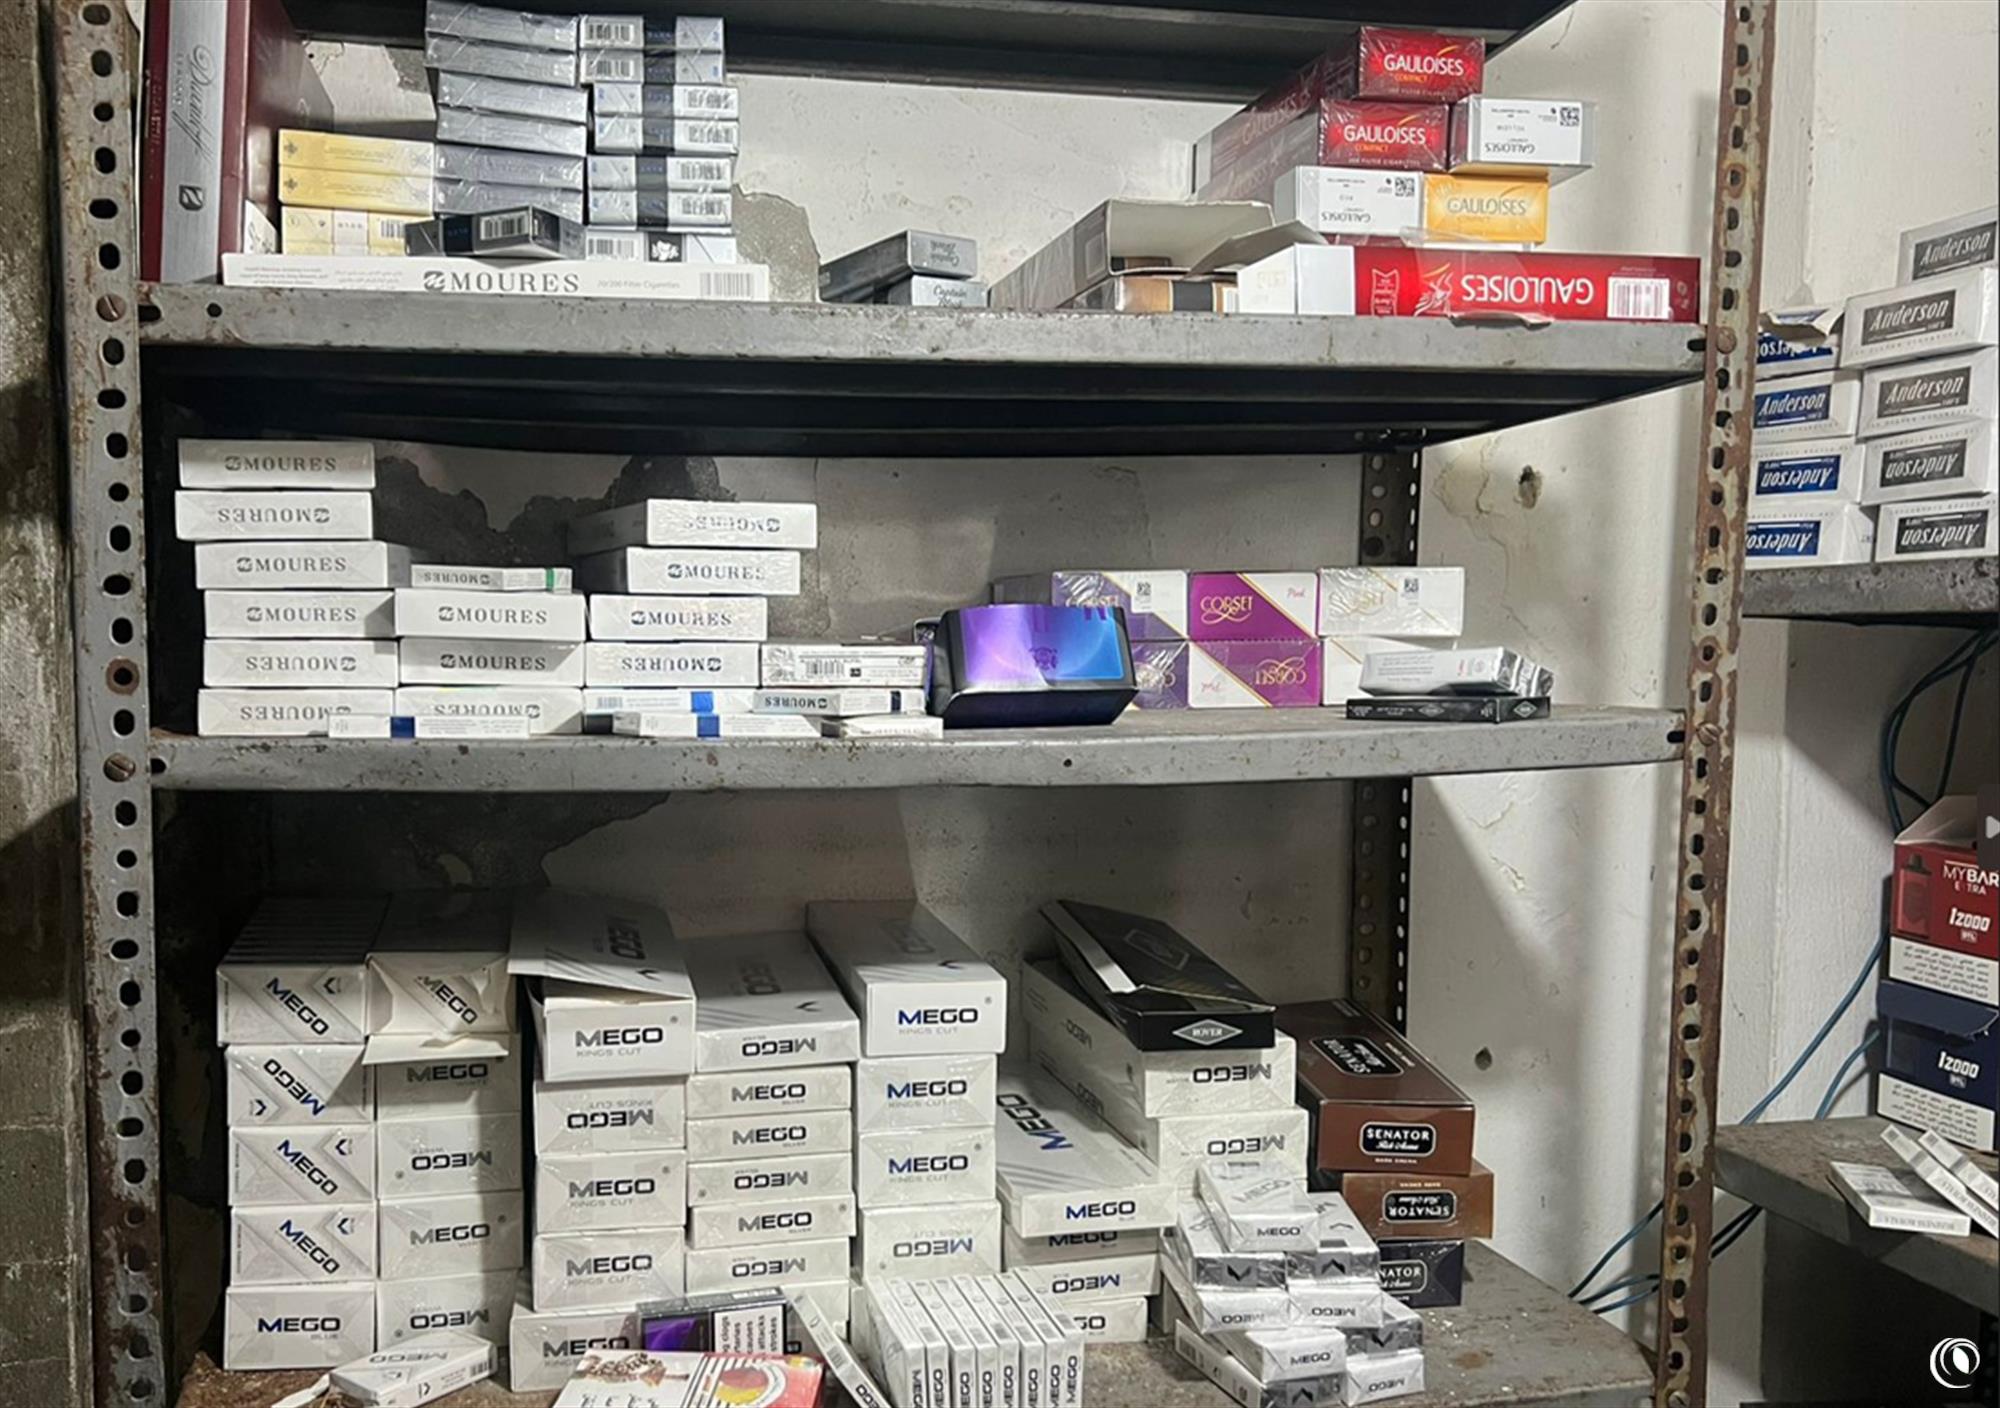 The Regie Seizes Smuggled and Counterfeit Tobacco Products